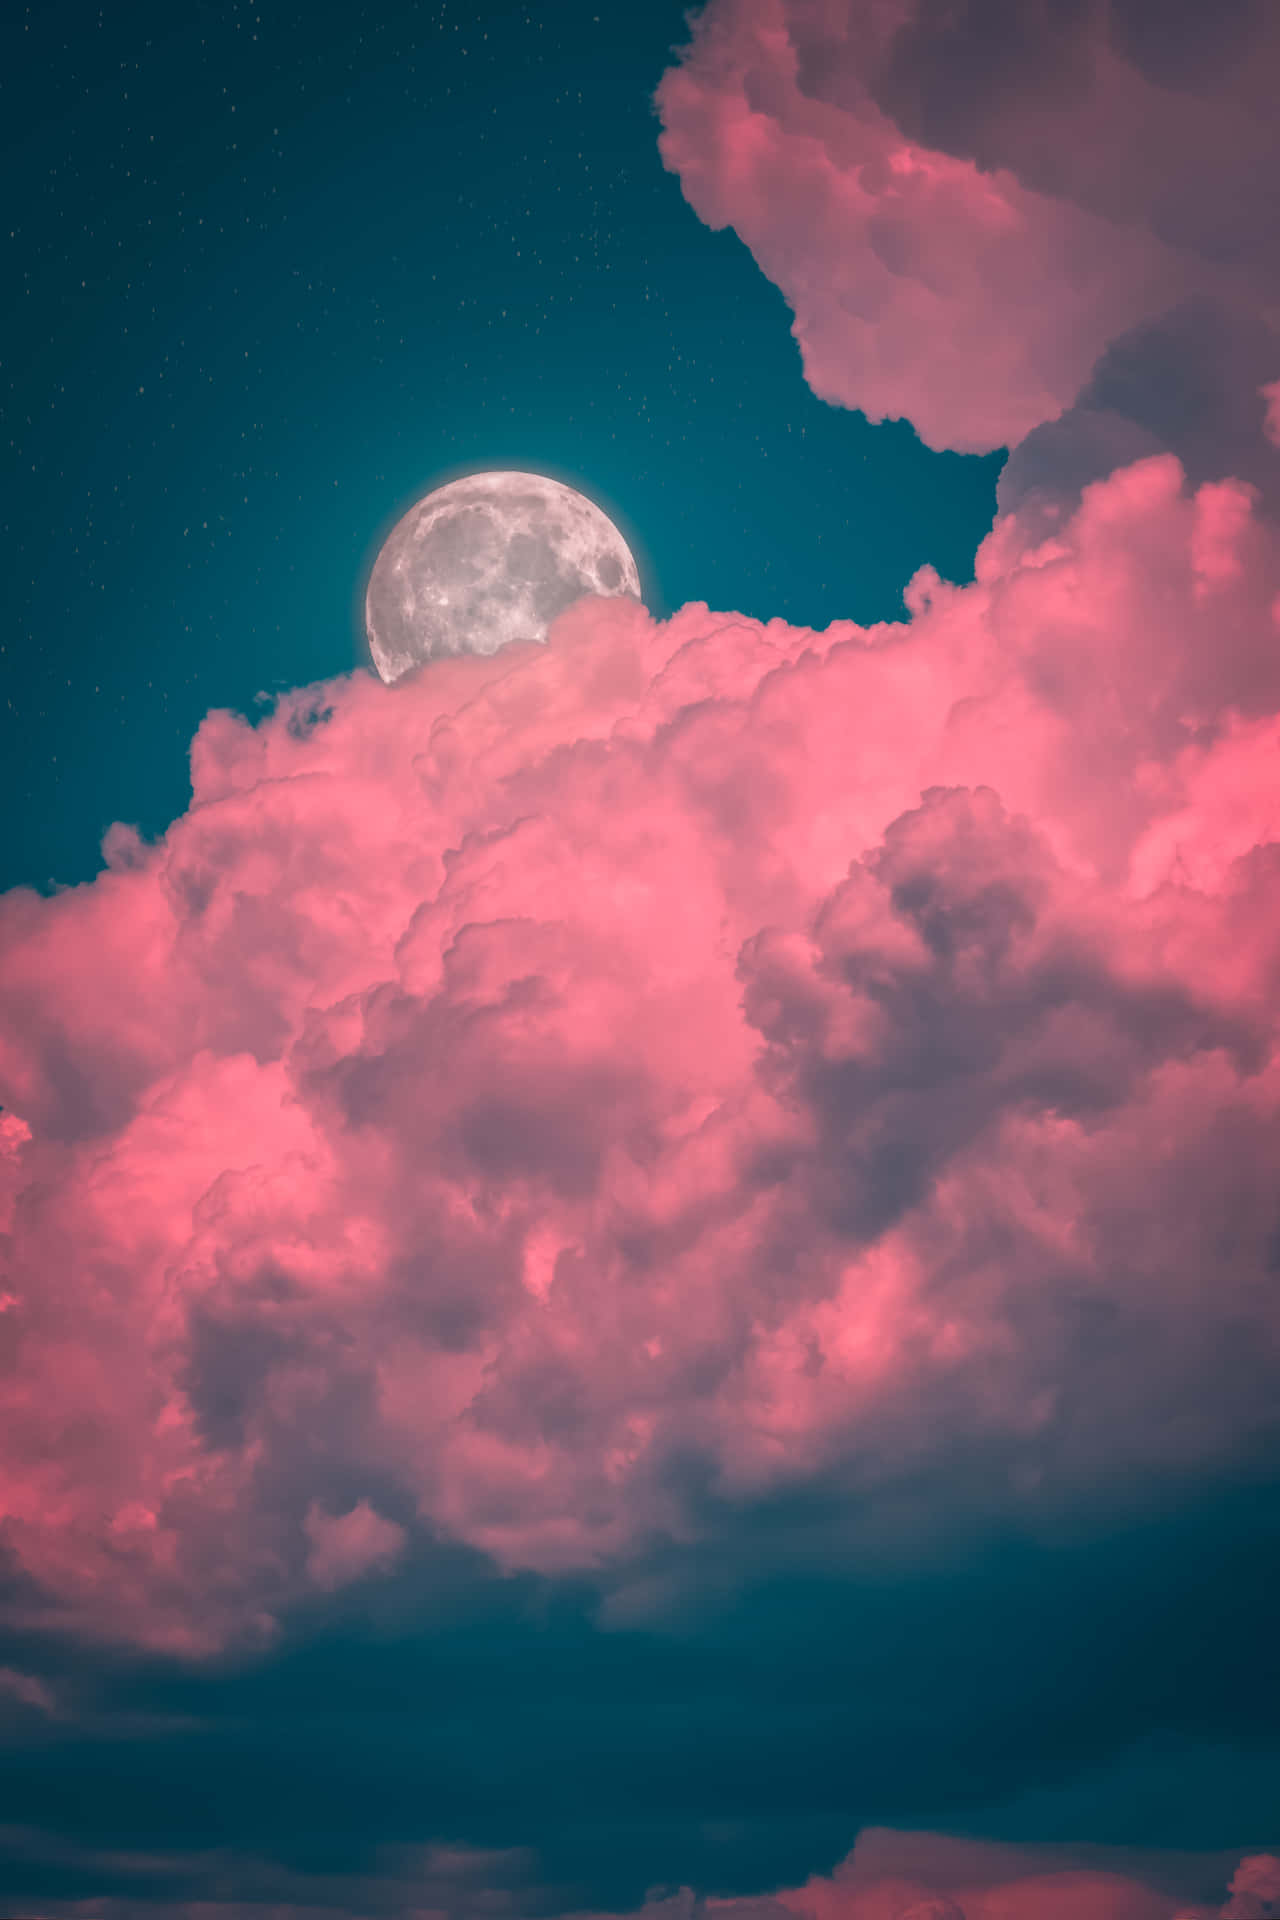 Enchanting View of a Cute Moon on a Starry Night Wallpaper